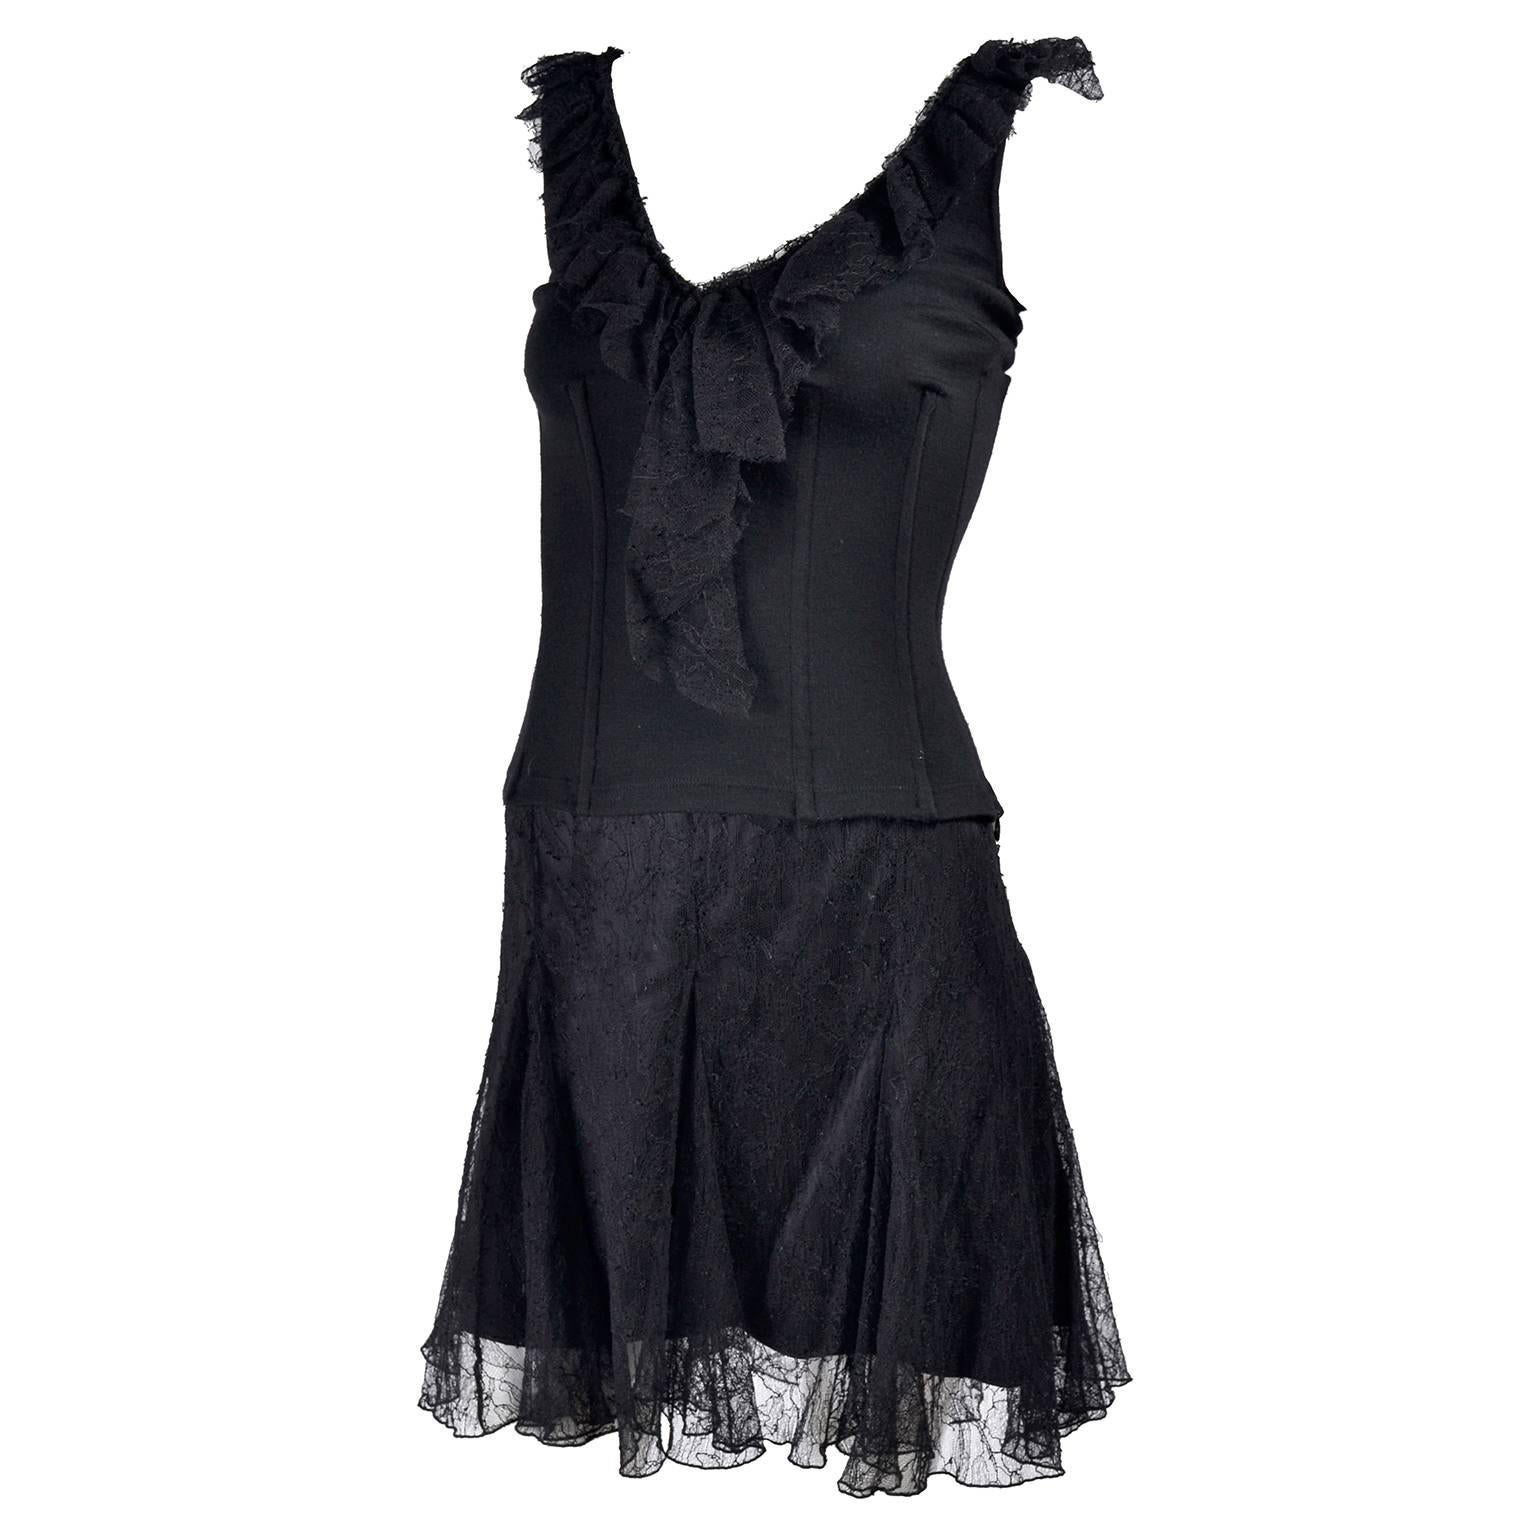 Dolce & Gabbana Black Lace 2 pc Dress With Corset Style Top and Lace Skirt For Sale